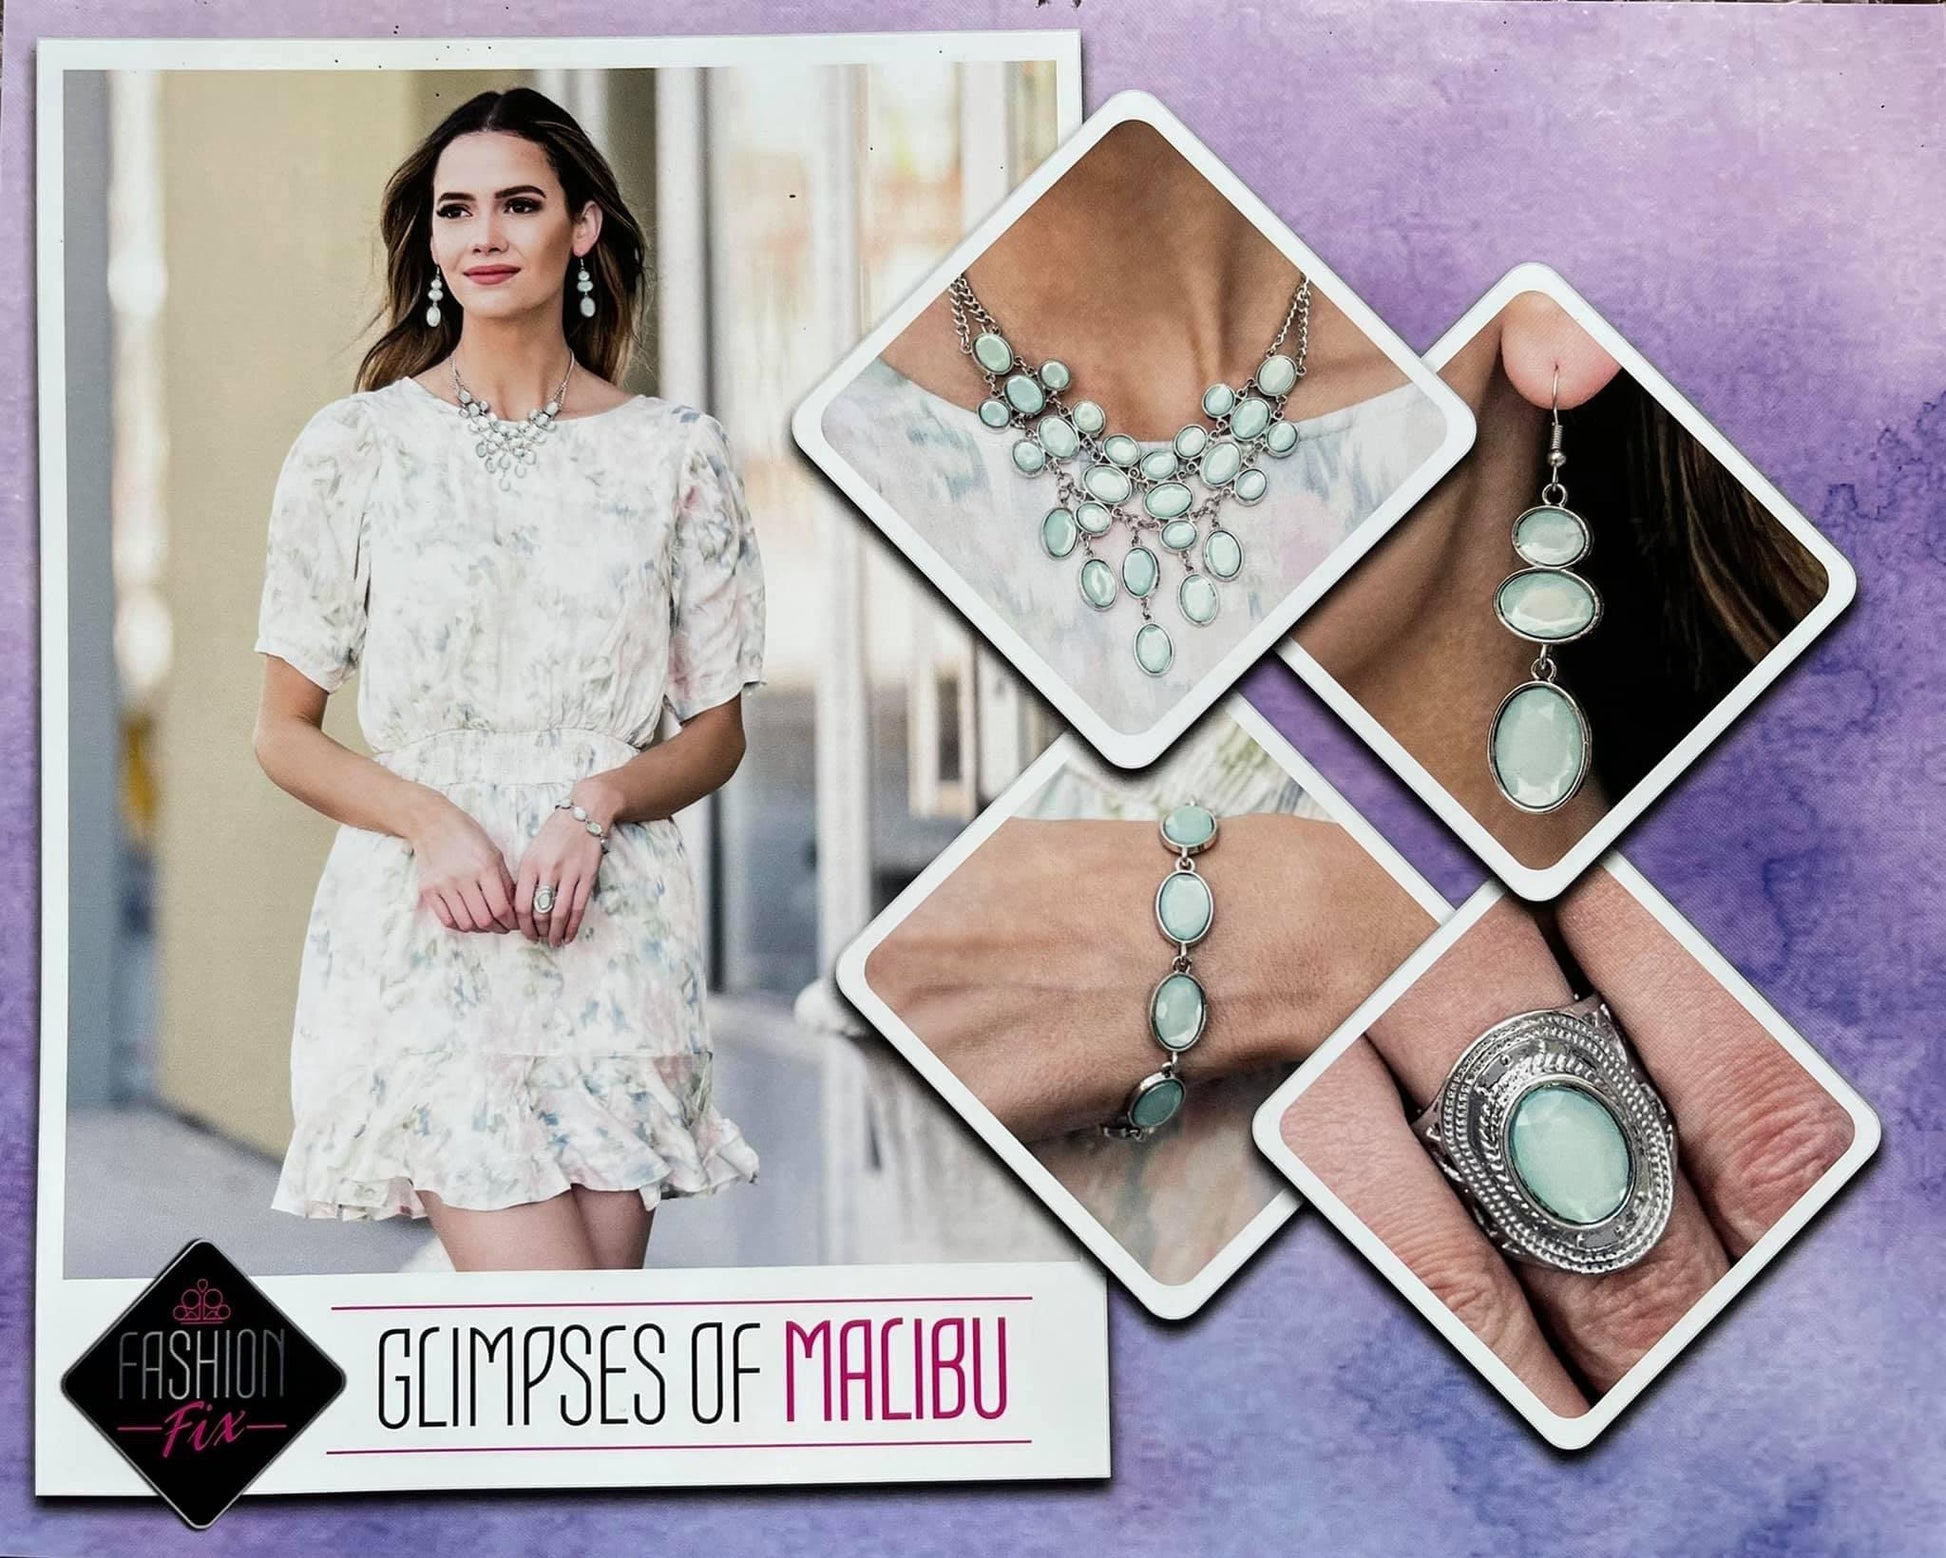 Paparazzi Accessories Glimpses of Malibu: FF May 2021 The Glimpses of Malibu collection was created with inspiration from the styles of Malibu, CA. Styles in this Trend Blend will feature fun, livable fashion with an upscale flavor. The colors are usually